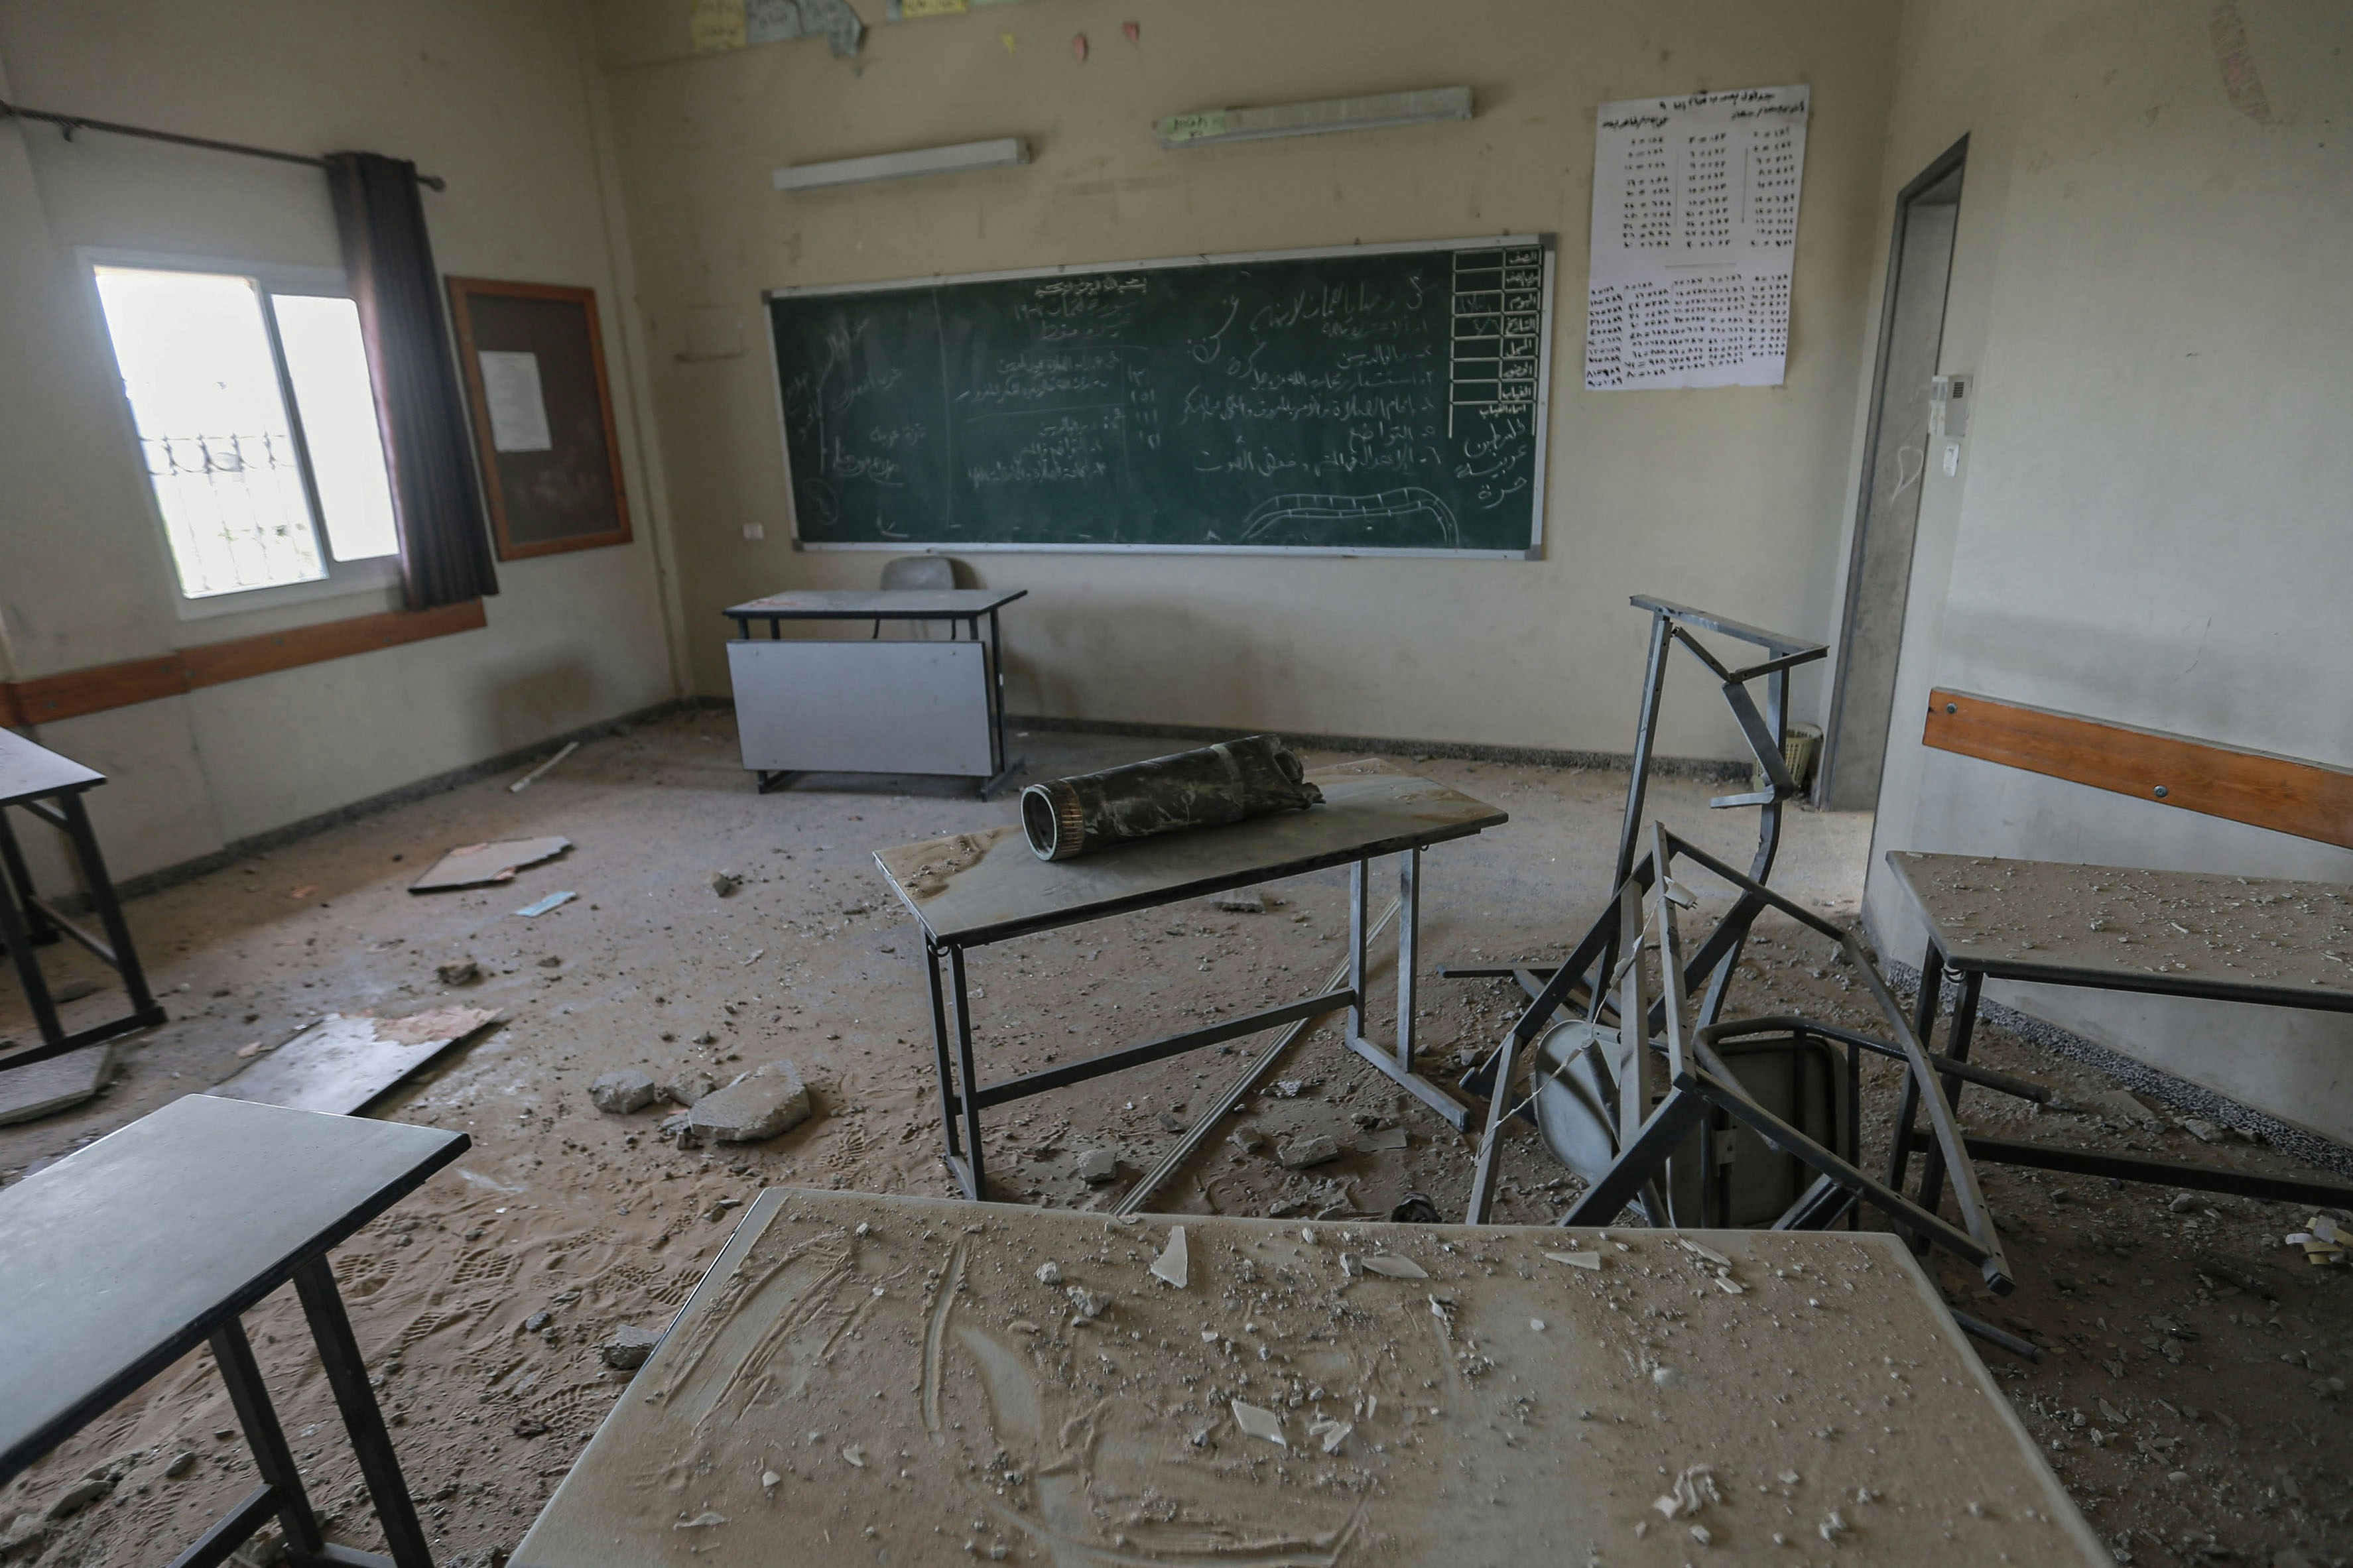 30 May 2021, Palestinian Territories, Gaza City: A general view of an exploded Israeli shell inside a damaged classroom of a school that was hit during the recent Israeli airstrikes on the Zeitoun neighbourhood in Gaza City. Israel and the Palestinian Hamas Islamist movement have so far been keeping to an agreed ceasefire that went into effect on 21 May after 11 days of deadly confrontations. Photo: Mohammed Talatene/dpa (Photo by Mohammed Talatene/picture alliance via Getty Images)